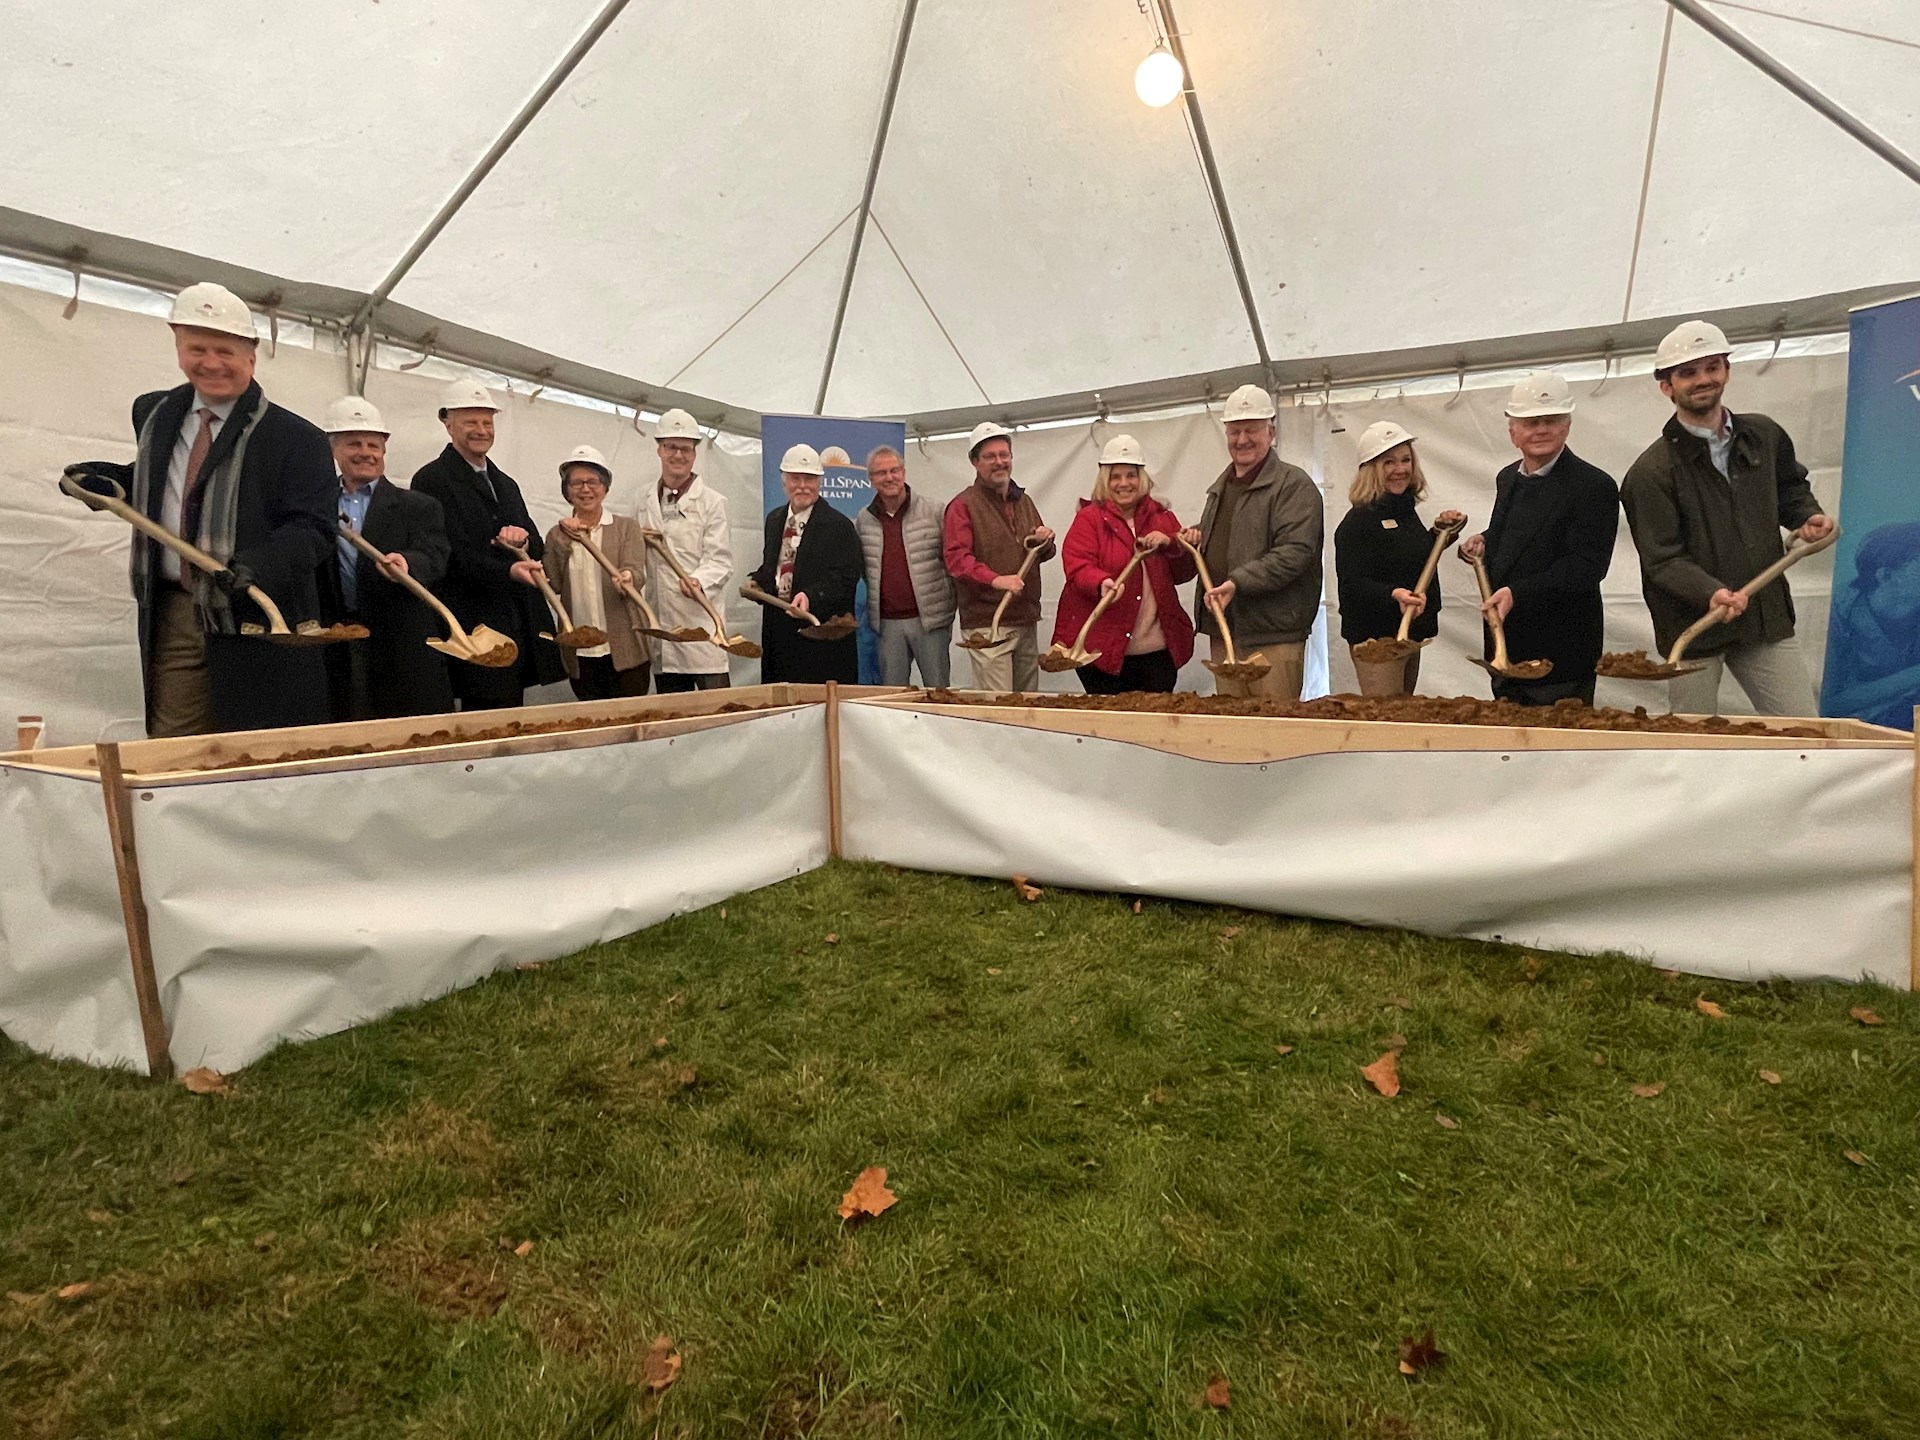 WellSpan Health breaks ground on new health center at Penn National Golf Club that will expand access to care in Franklin County